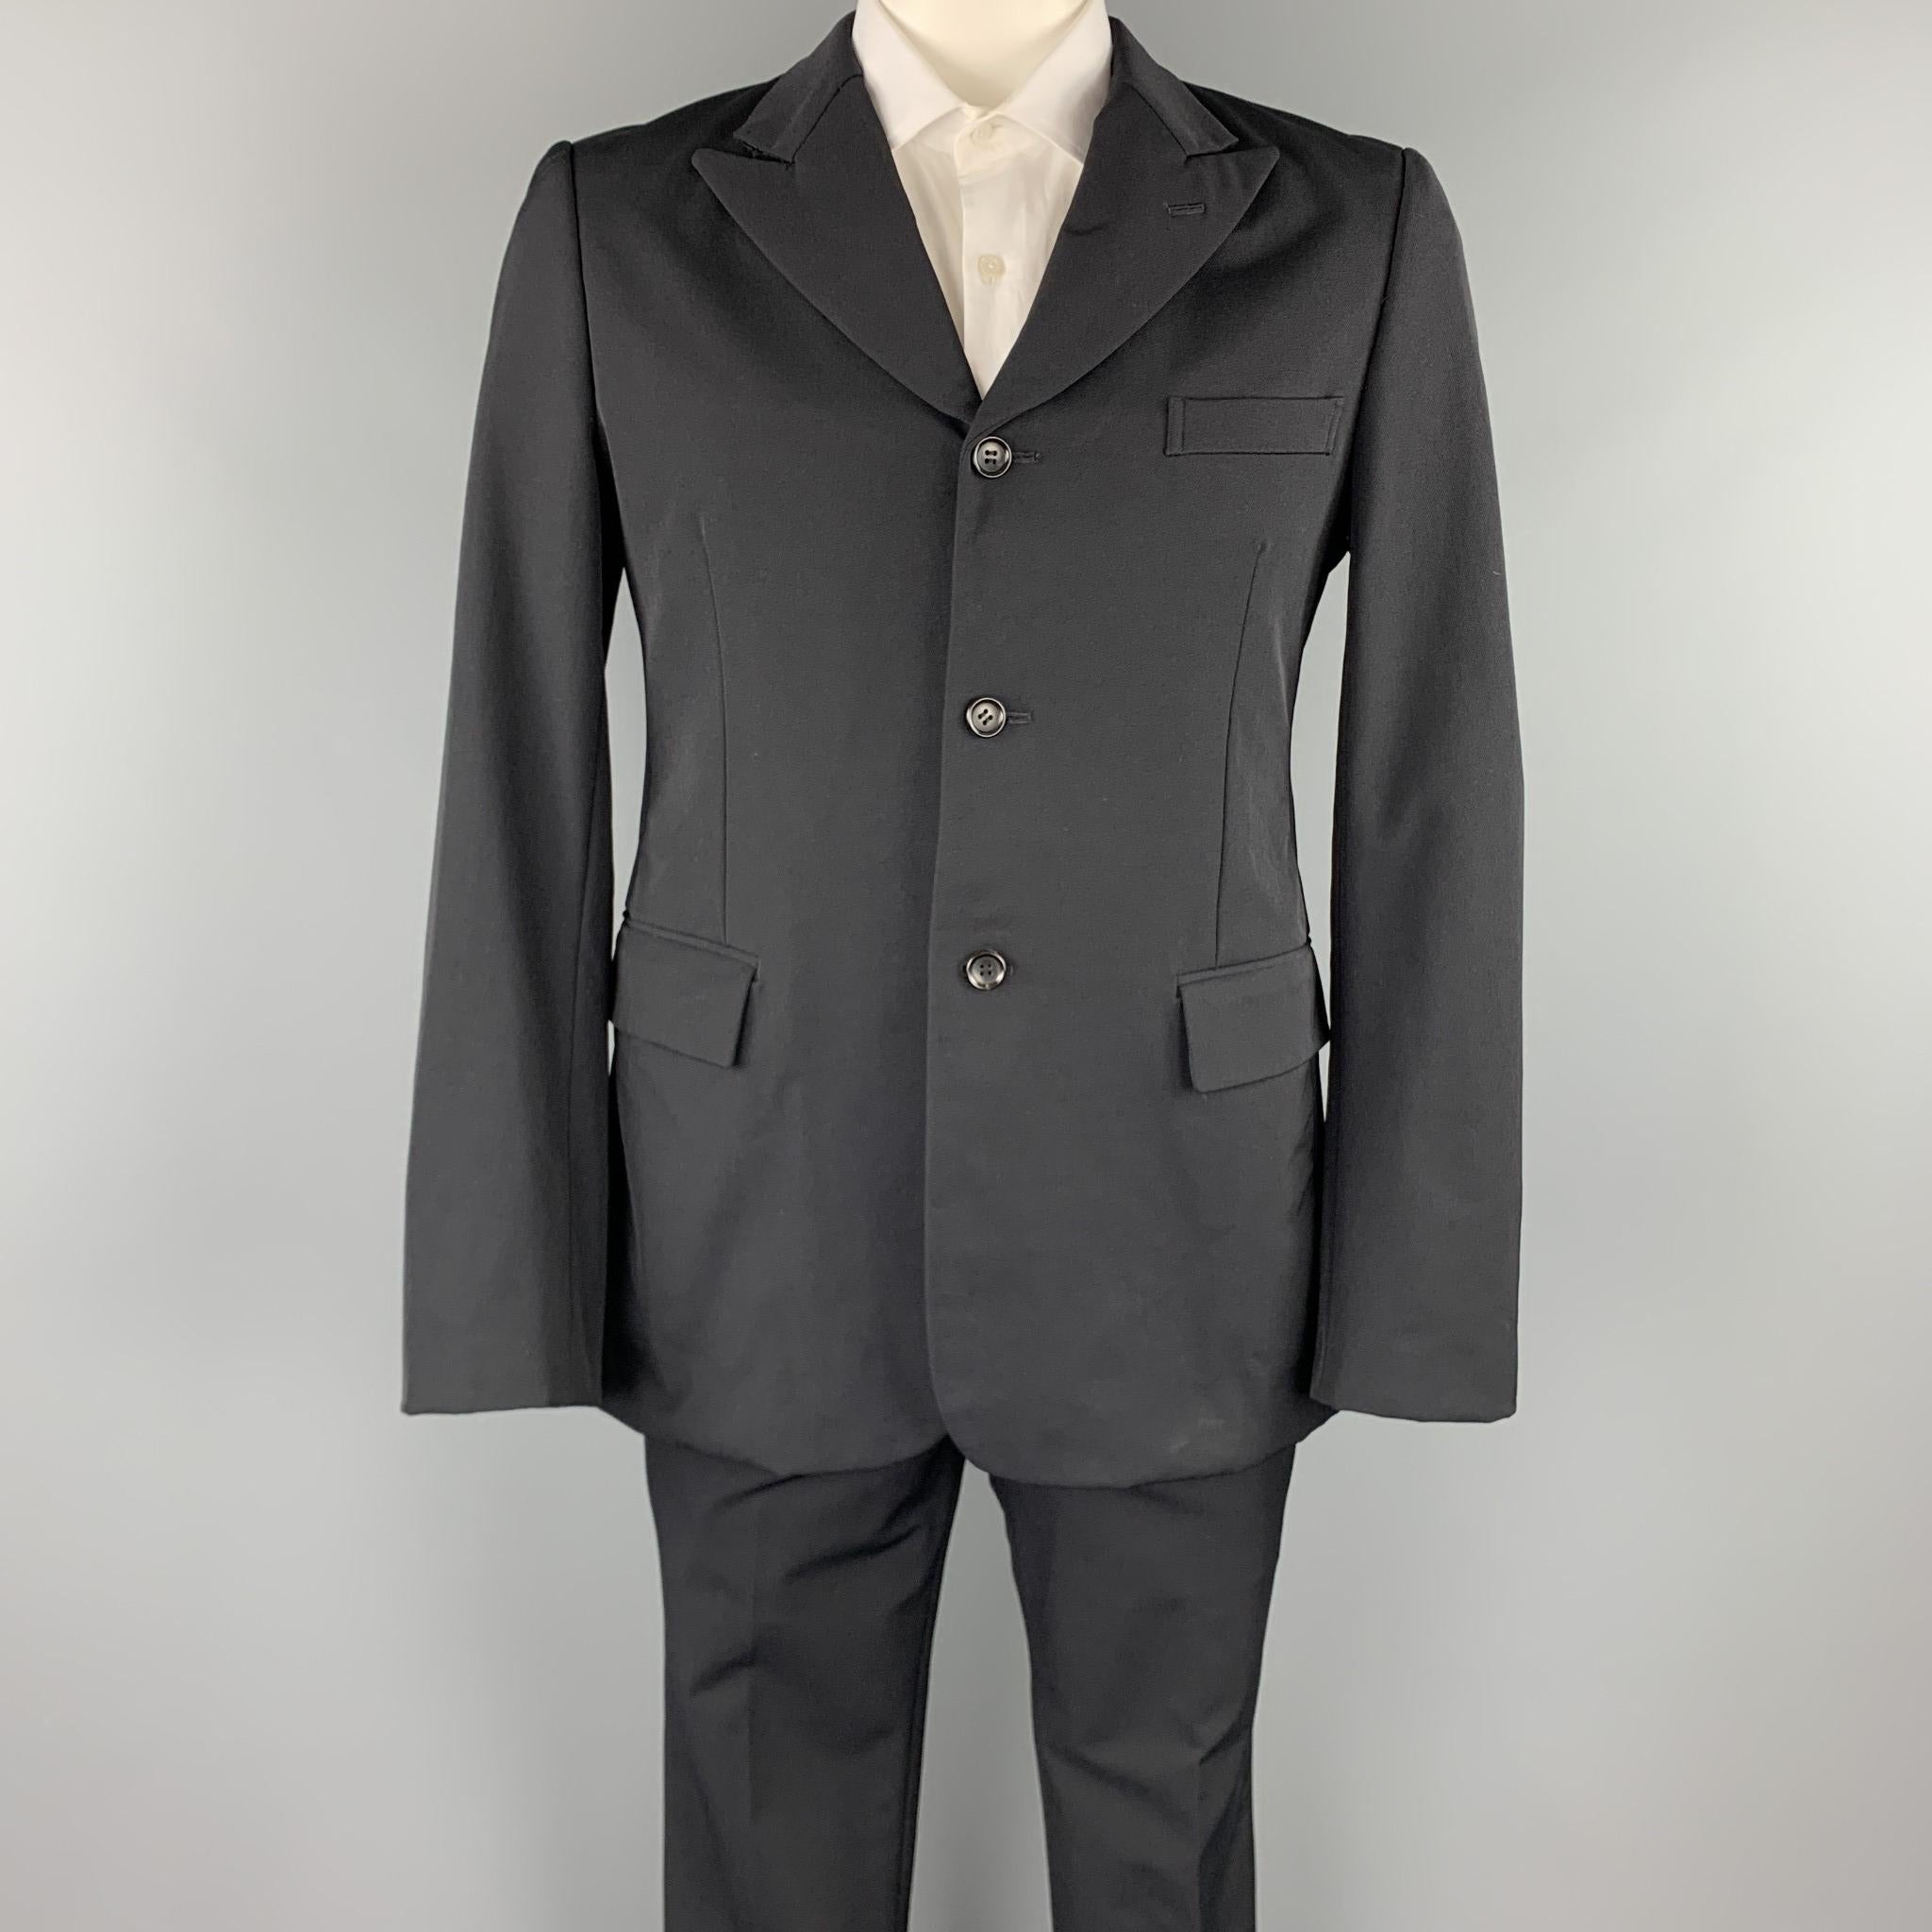 COMME des GARCONS HOMME PLUS suit comes in a black with a full liner and includes a single breasted, three button sport coat with a peak lapel and matching flat front trousers. Made in Japan.

Excellent Pre-Owned Condition.
Marked: